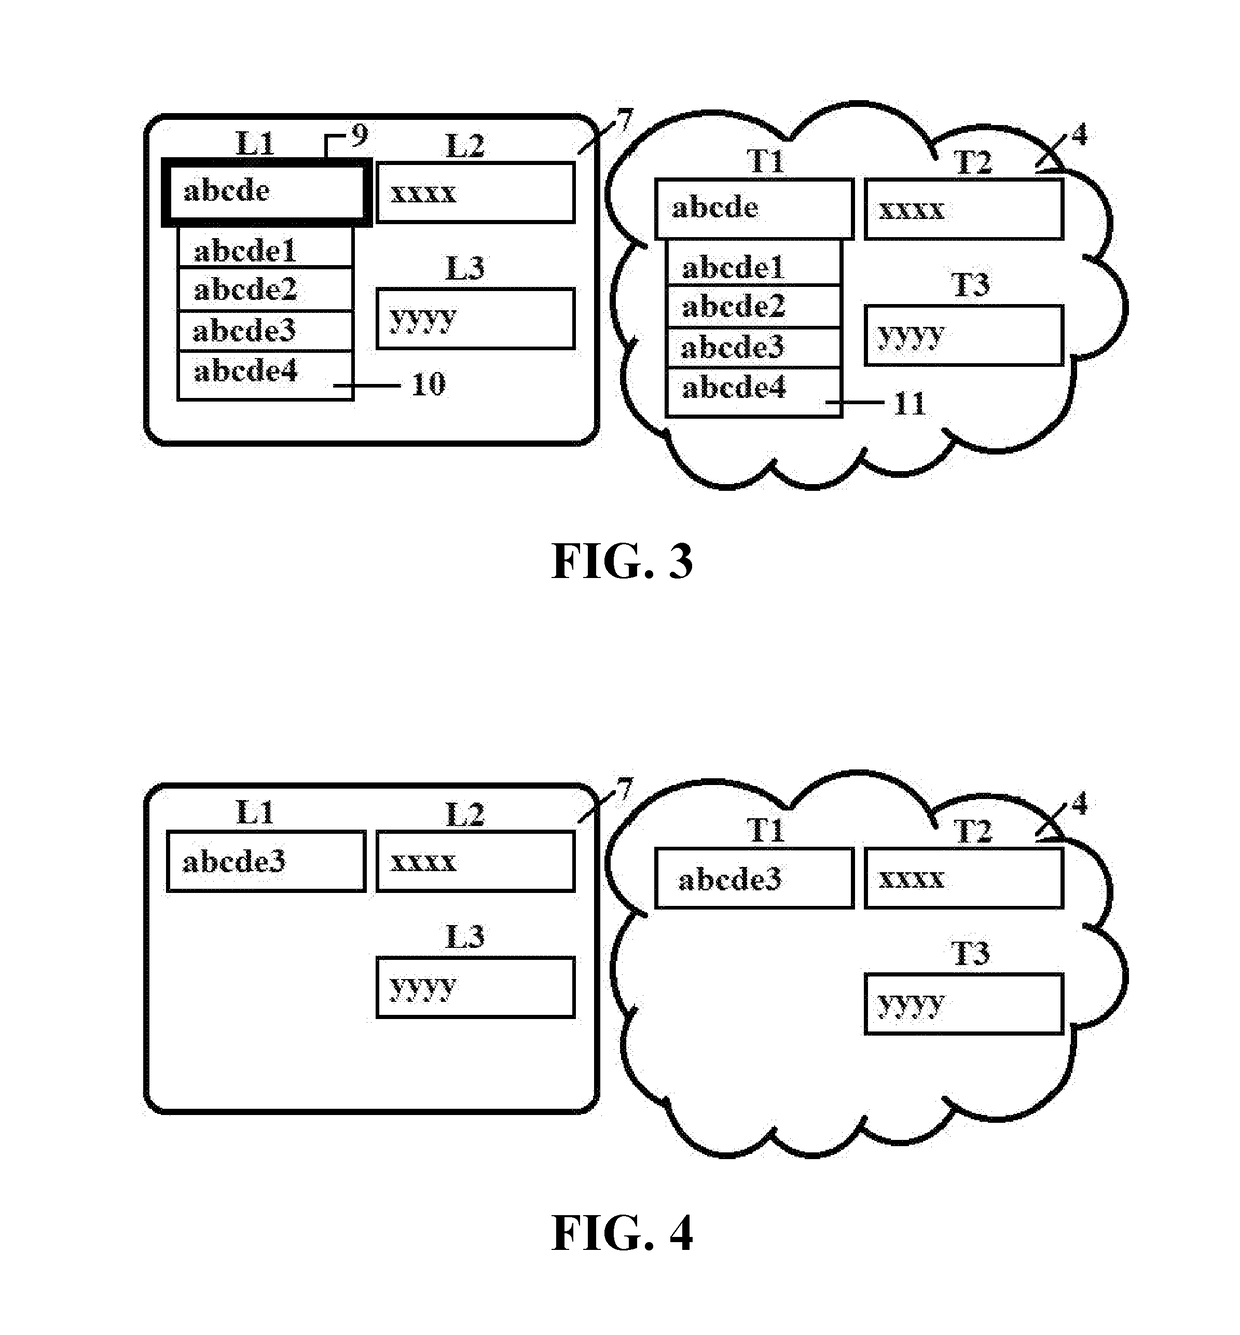 System for reducing user-perceived lag in text data input and exchange with a server